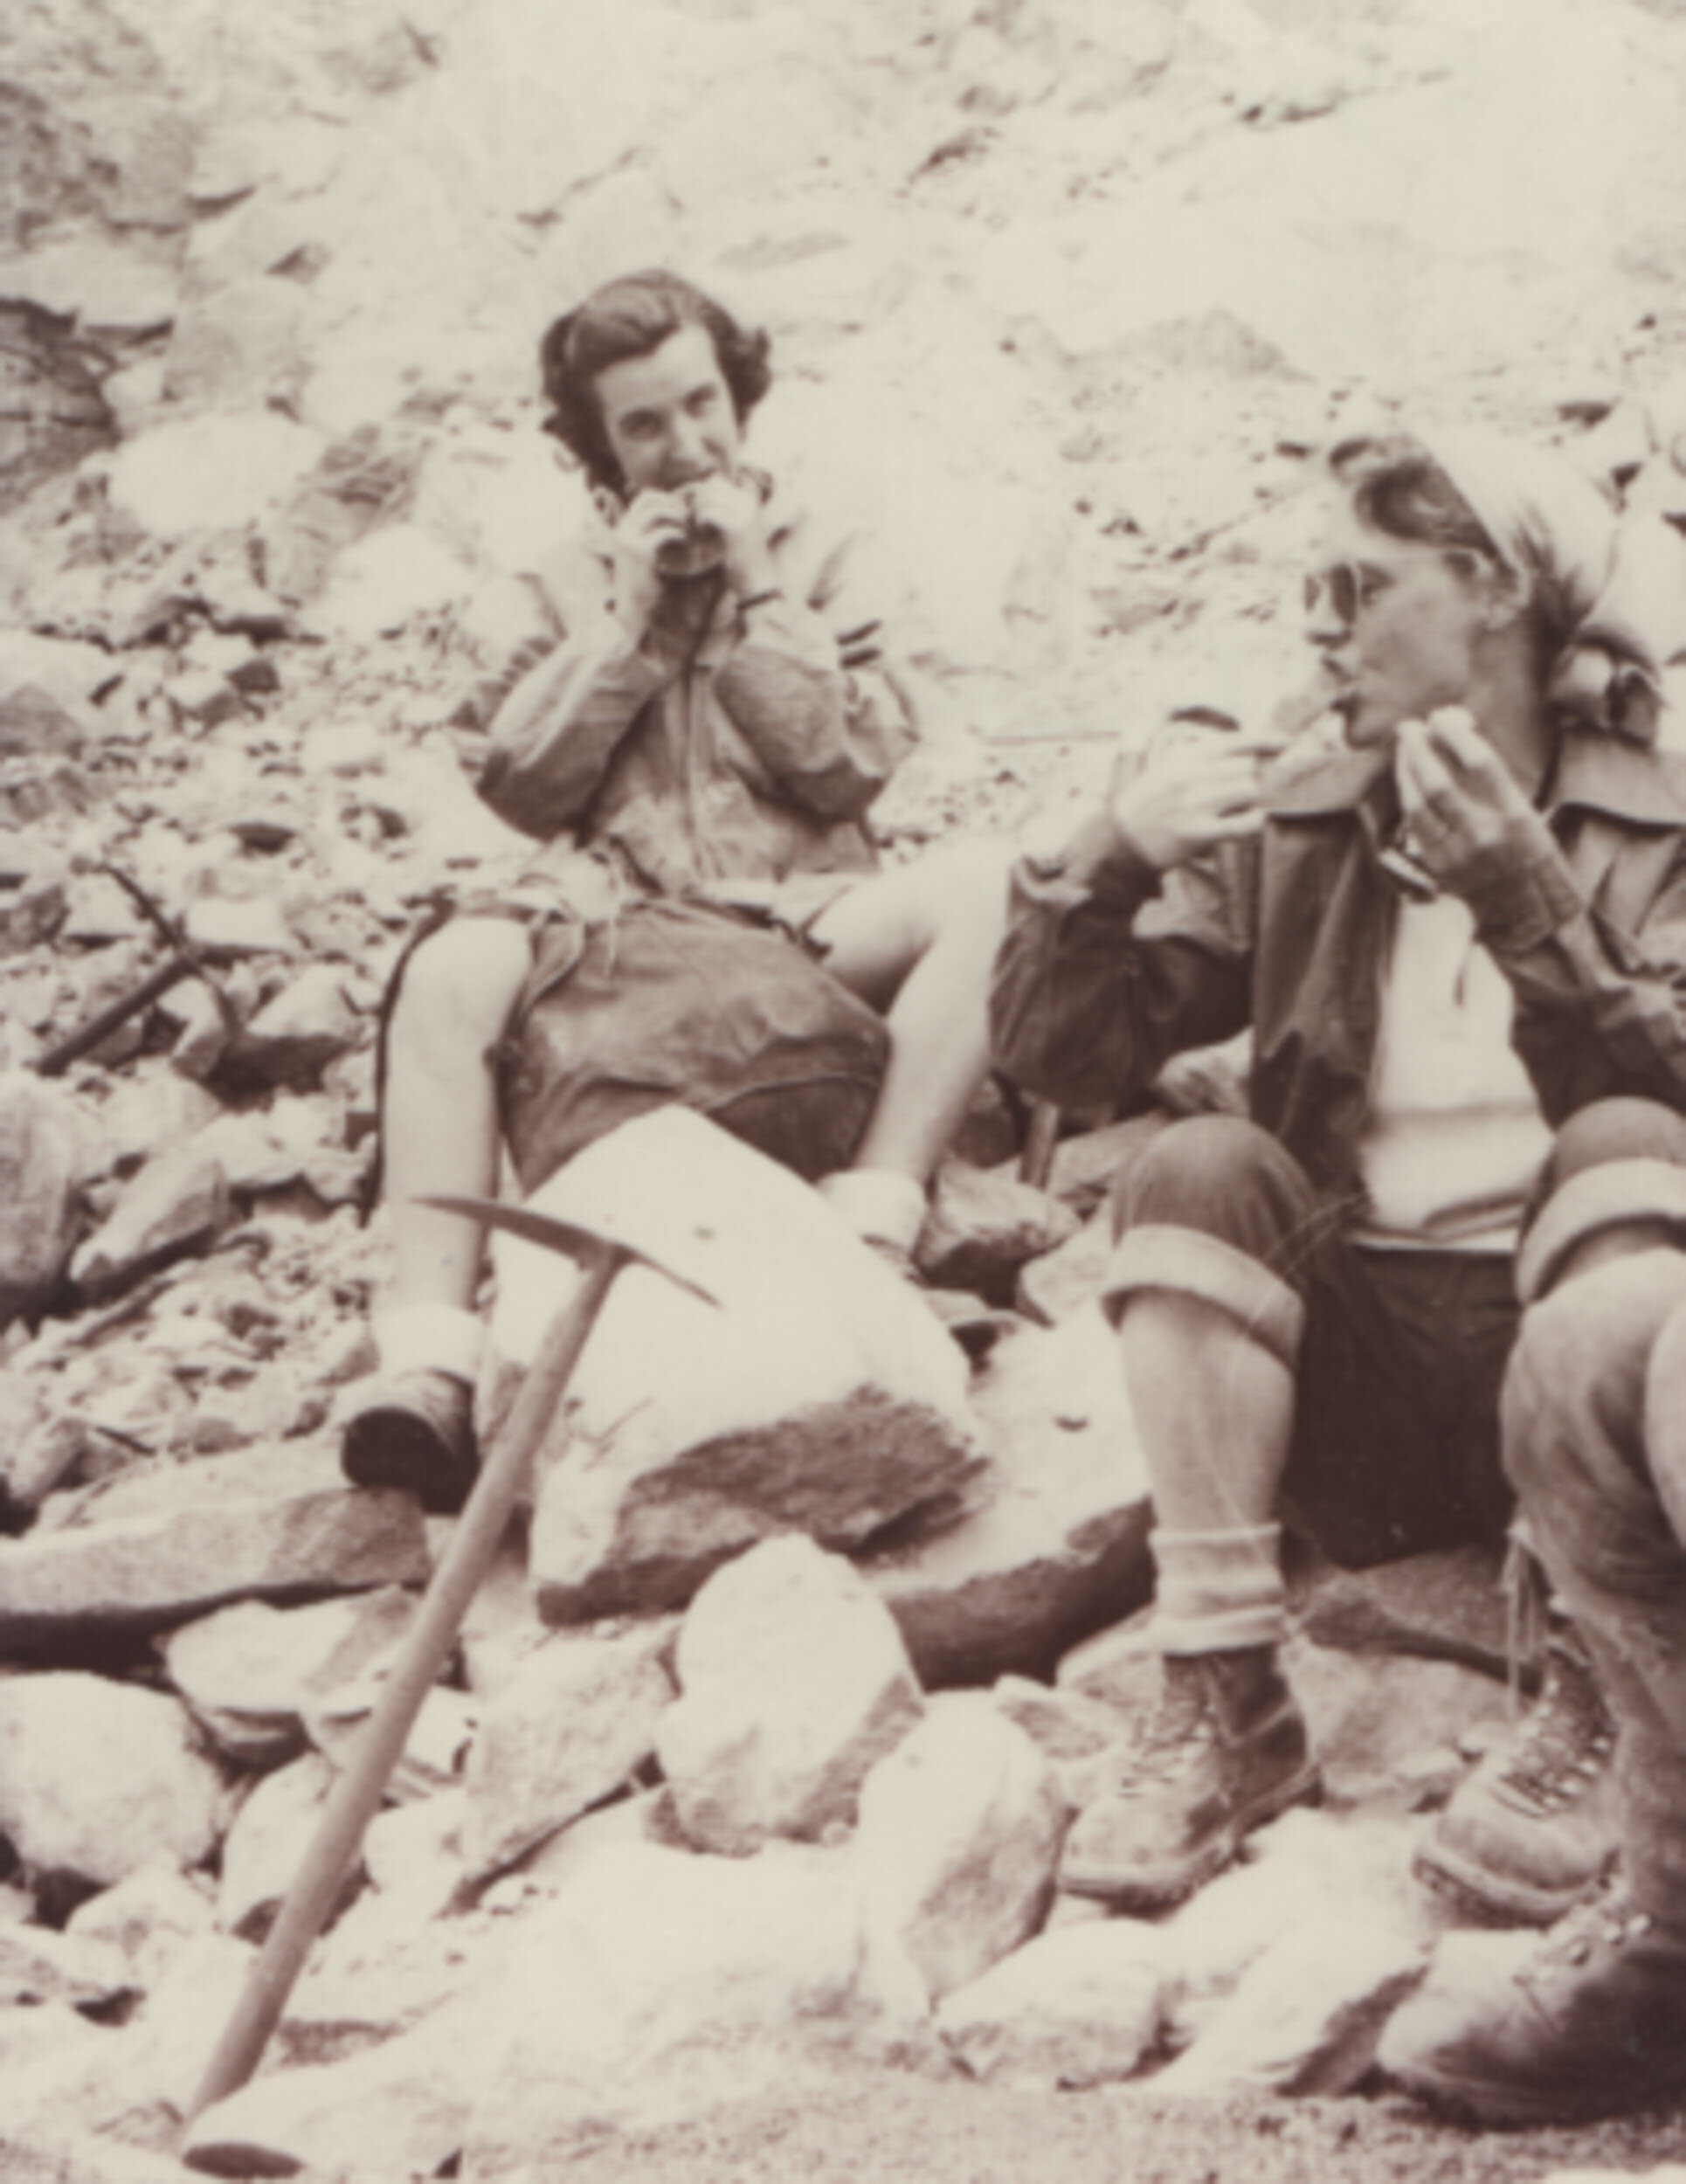 A very tough lunch: Nea Morin and Eileen Pyatt, Les Angeaux, French Alps, 1954